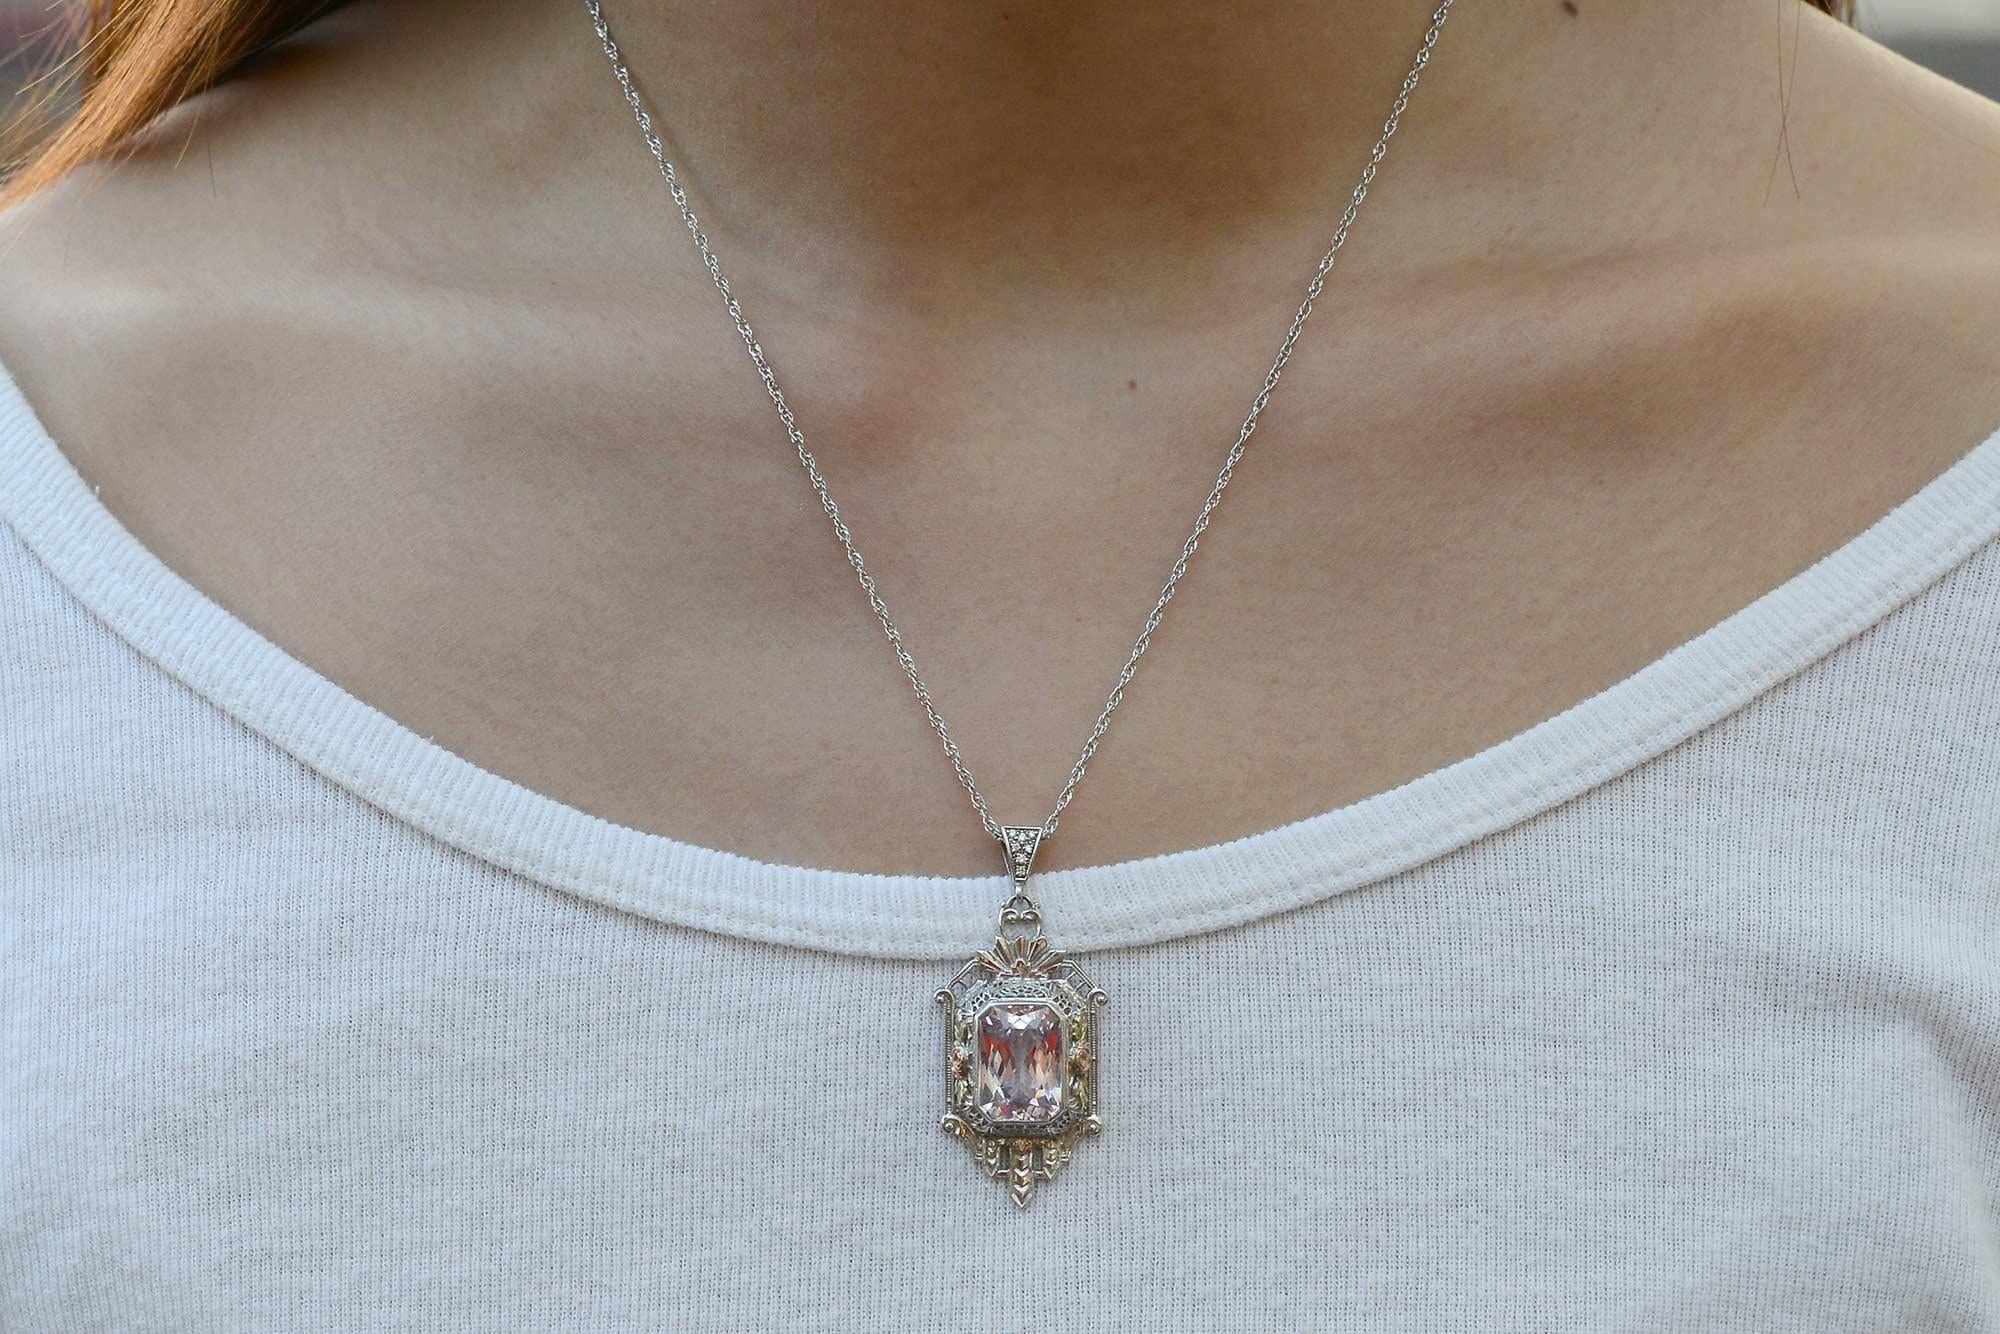 This original 1920s Art Deco pendant makes a distinctive and pronounced statement necklace. The blushingly bright 9 carat pink Kunzite features an outstanding octagonal mixed cut with geometric facets that catch light from every angle. The feminine